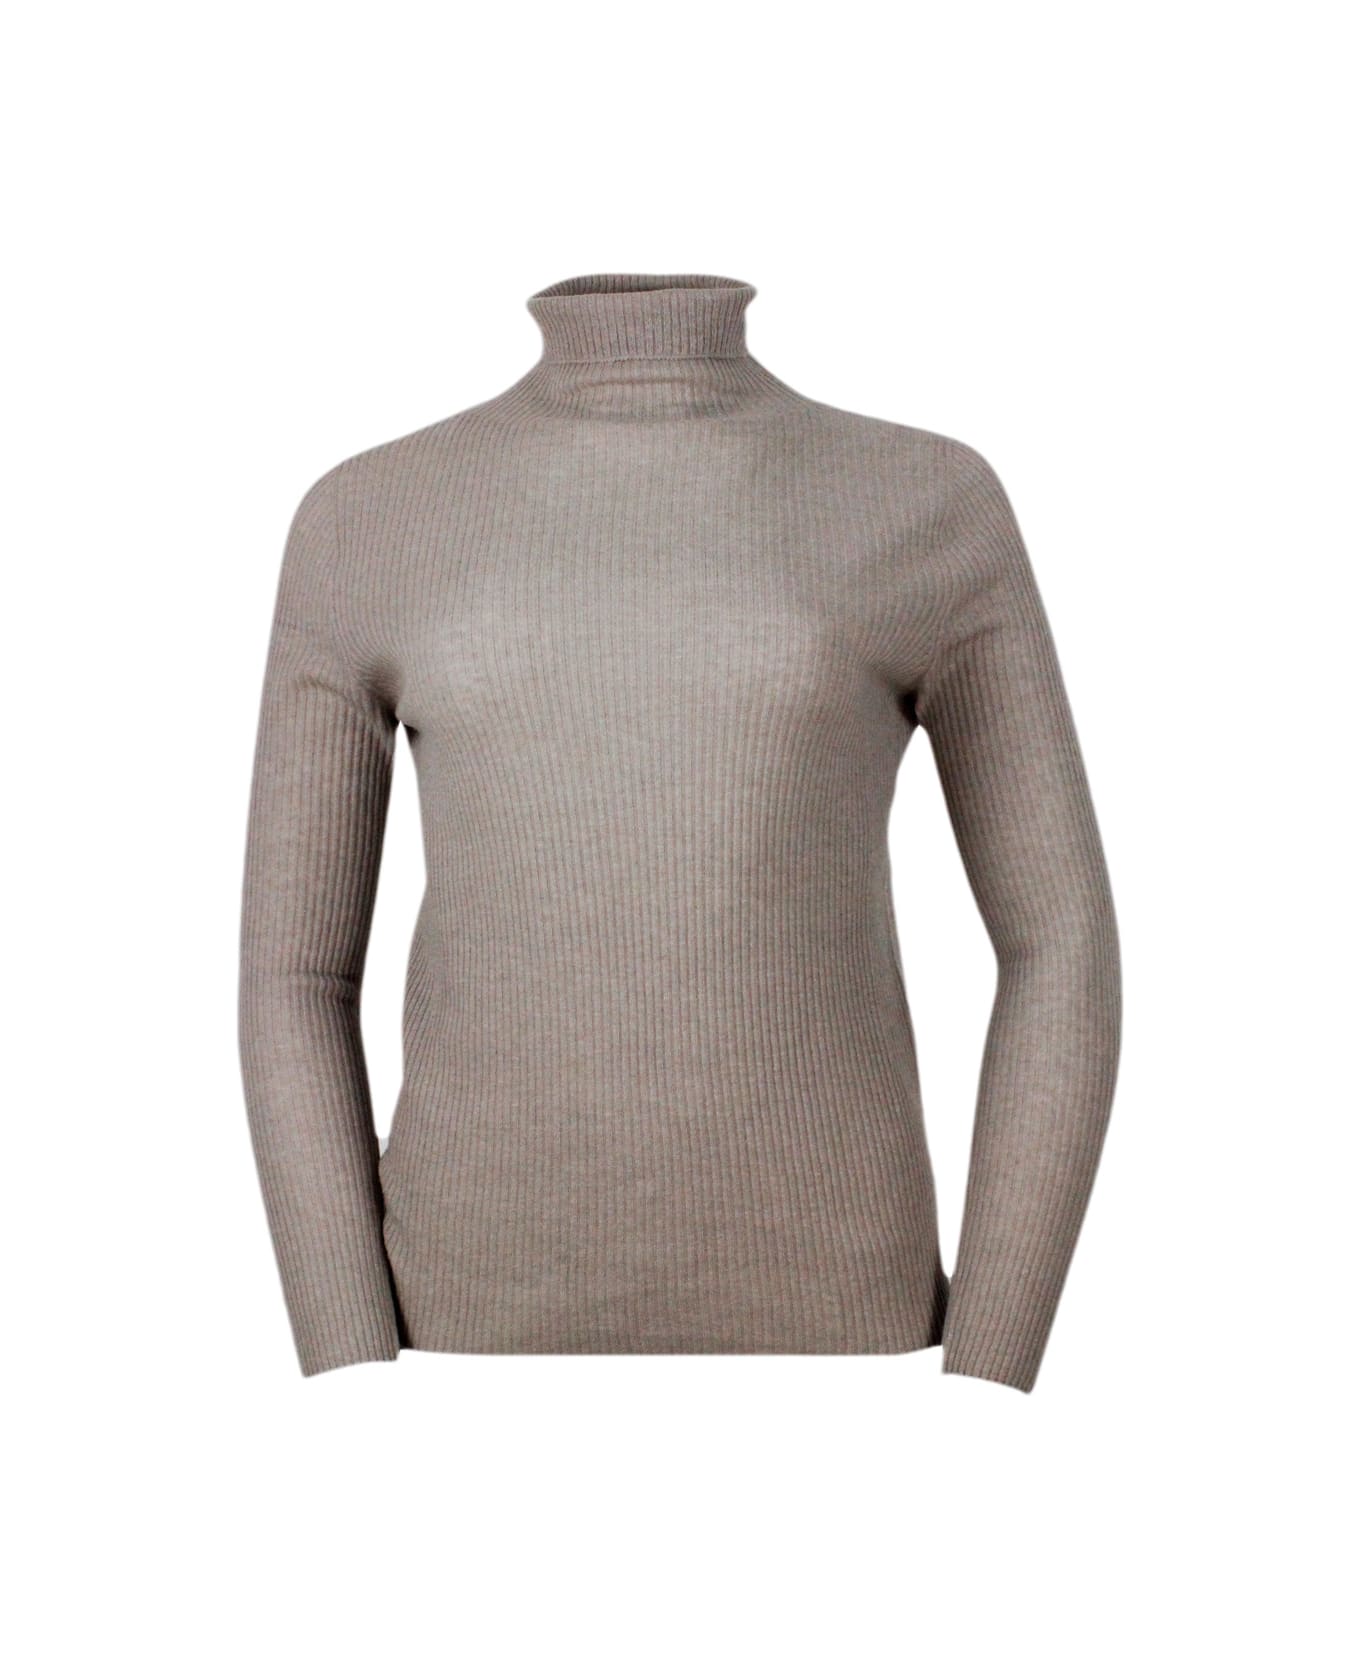 Fabiana Filippi Lightweight Turtleneck Long-sleeved Sweater In Soft And Fine Wool, Silk And Cashmere With Small Rib Knit - Nut ニットウェア